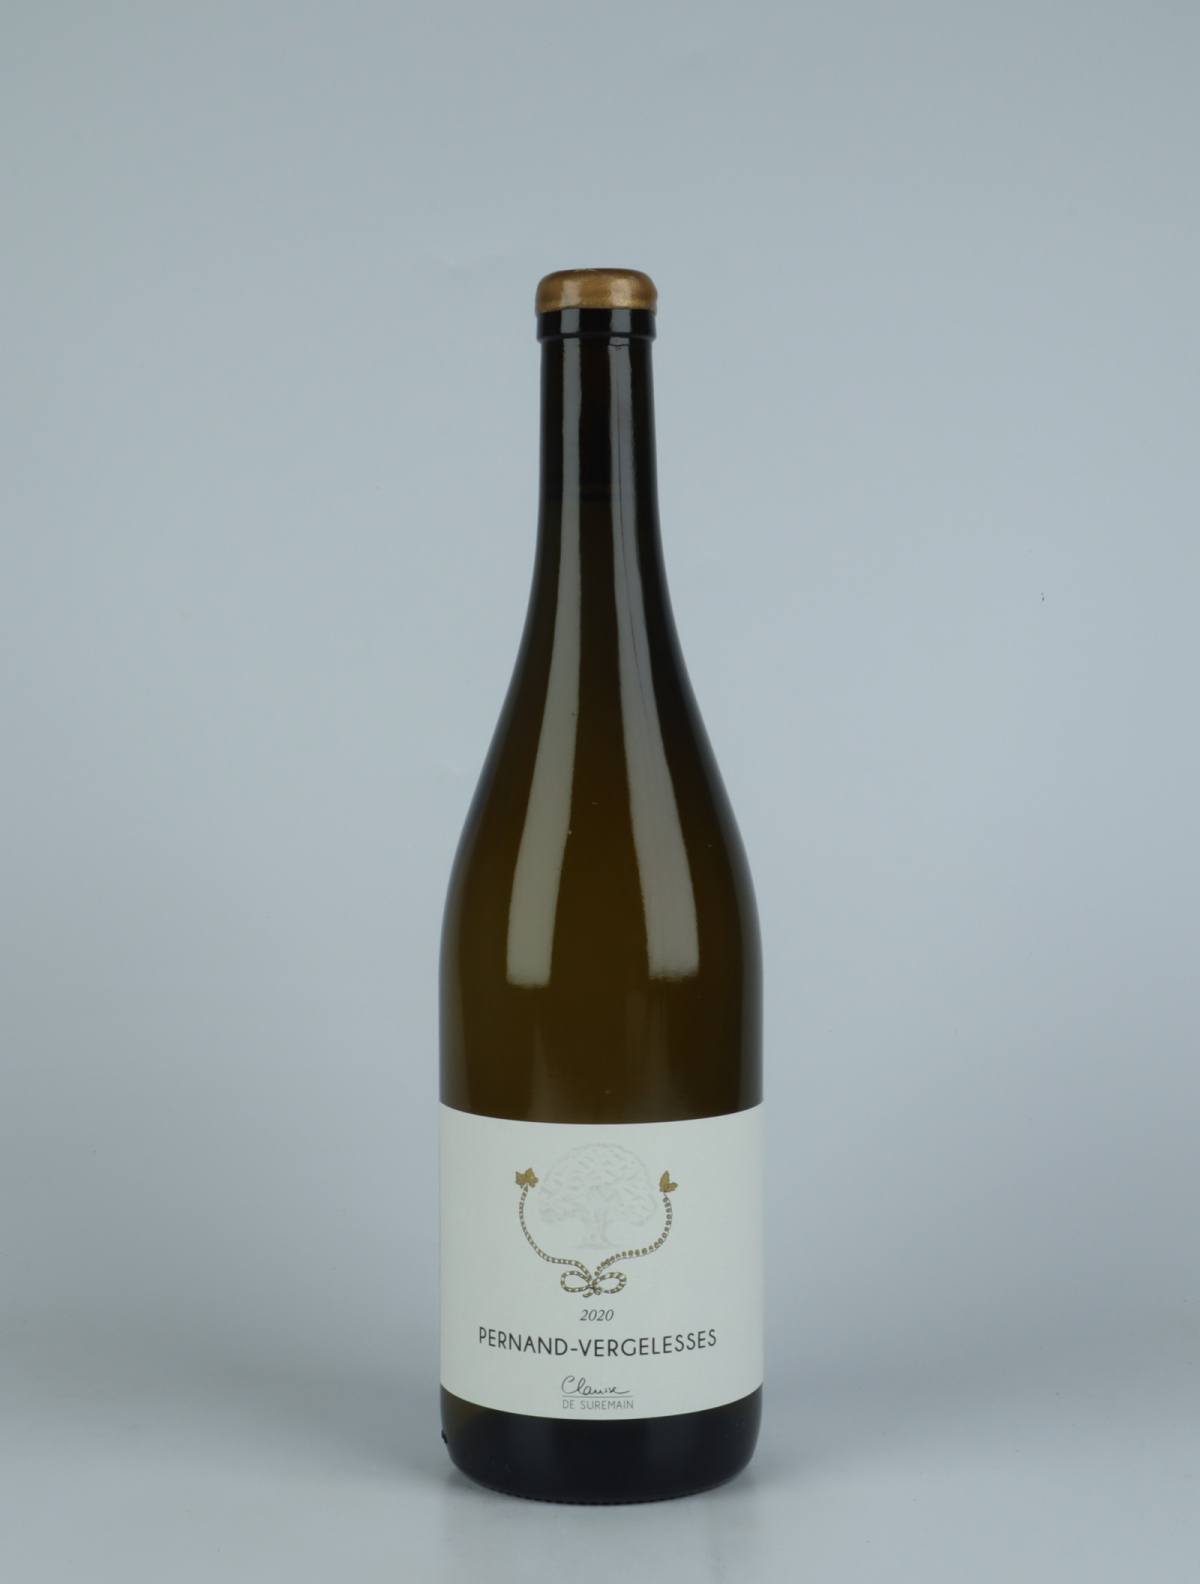 A bottle 2020 Pernand-Vergelesses White wine from Clarisse de Suremain, Burgundy in France